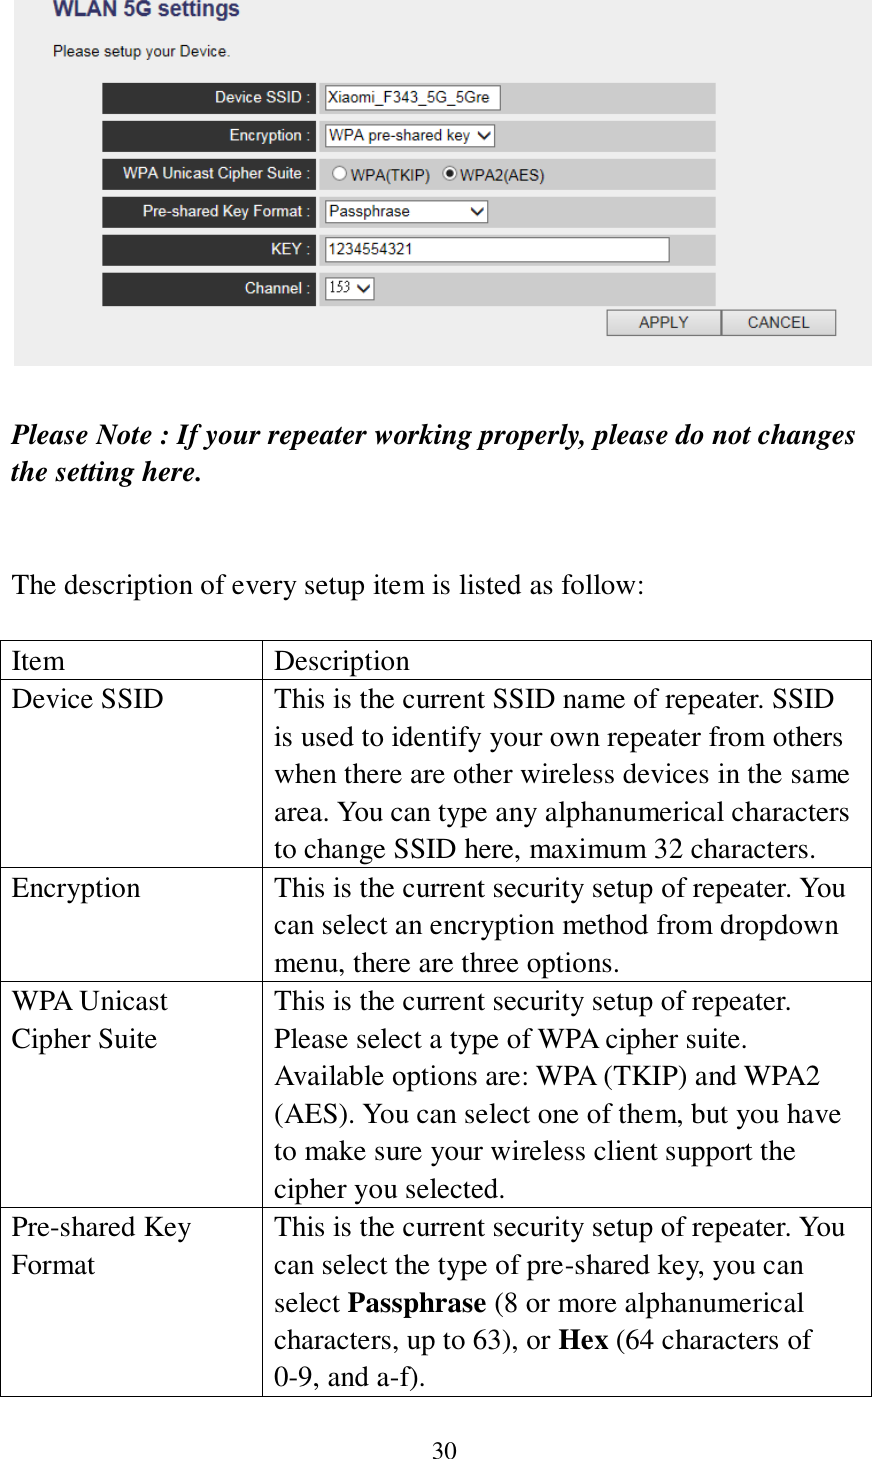 30   Please Note : If your repeater working properly, please do not changes the setting here.   The description of every setup item is listed as follow:  Item Description Device SSID This is the current SSID name of repeater. SSID is used to identify your own repeater from others when there are other wireless devices in the same area. You can type any alphanumerical characters to change SSID here, maximum 32 characters. Encryption This is the current security setup of repeater. You can select an encryption method from dropdown menu, there are three options. WPA Unicast Cipher Suite This is the current security setup of repeater. Please select a type of WPA cipher suite. Available options are: WPA (TKIP) and WPA2 (AES). You can select one of them, but you have to make sure your wireless client support the cipher you selected. Pre-shared Key Format This is the current security setup of repeater. You can select the type of pre-shared key, you can select Passphrase (8 or more alphanumerical characters, up to 63), or Hex (64 characters of 0-9, and a-f). 